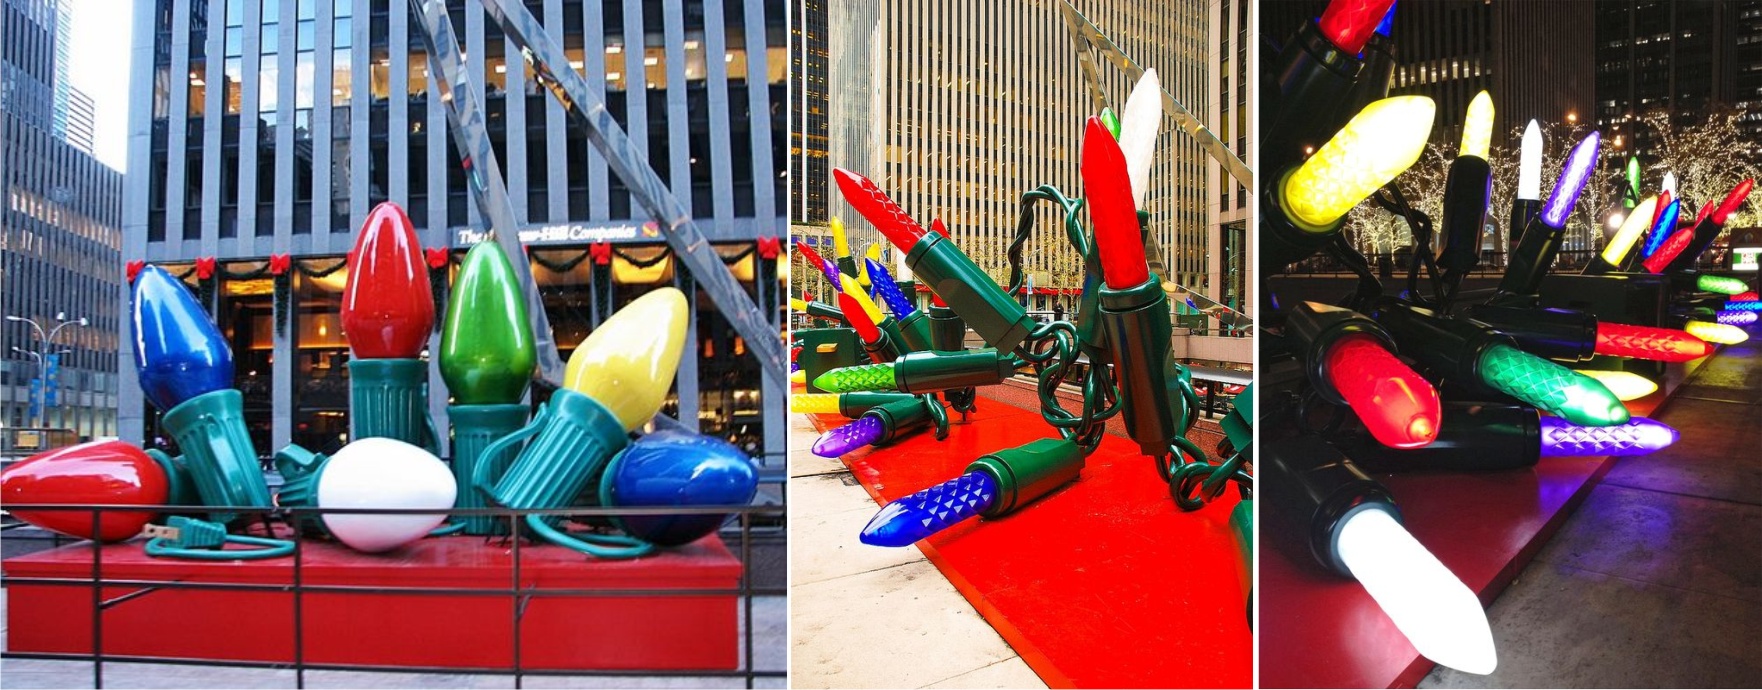 New Year's art objects made of foam and plastic 